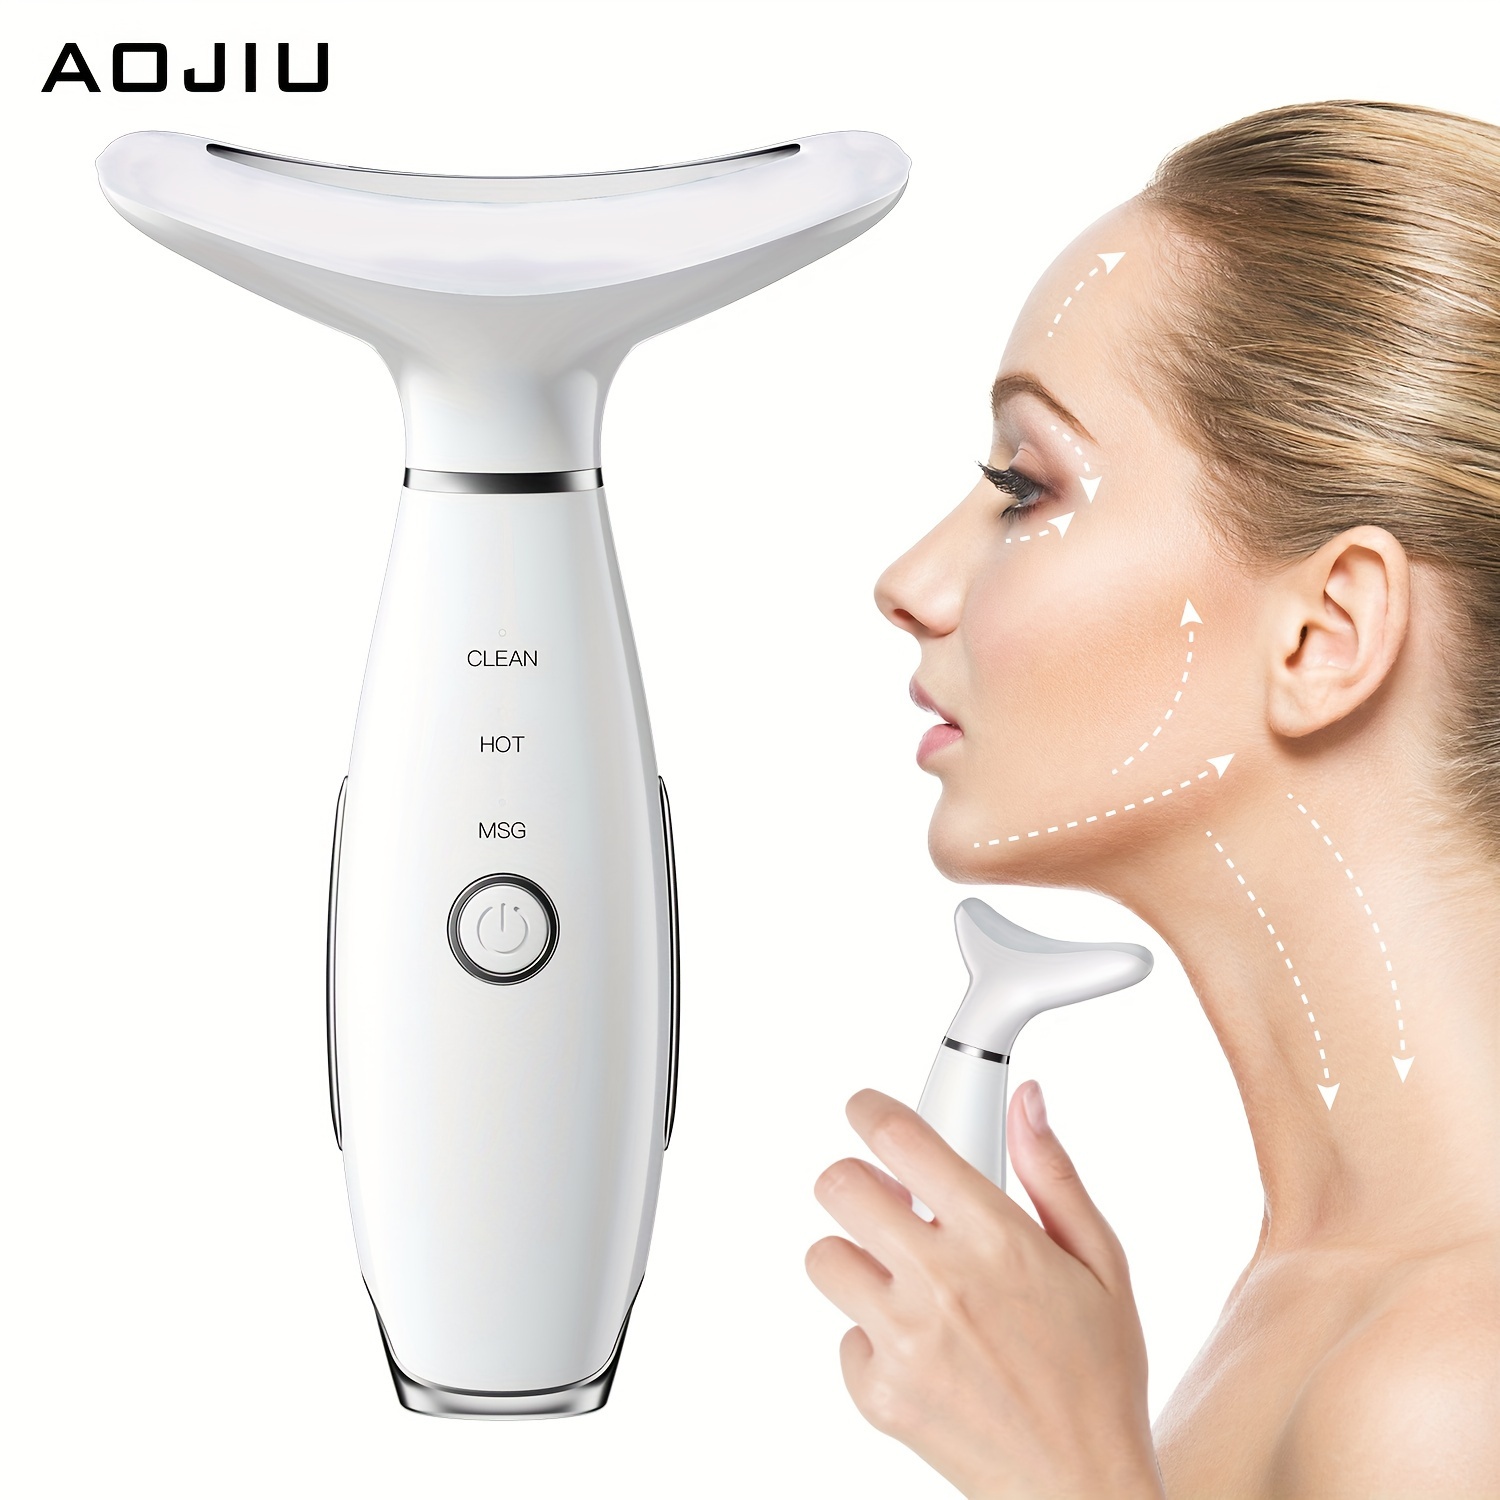 

Aojiu Home Neck, Face Beauty Massage Tool, Face Massager, Hot Compress Mode, Vibration Mode, Relax Skin, Home Spa, 3 In 1 Skin Care Massager, Gift For Girls!